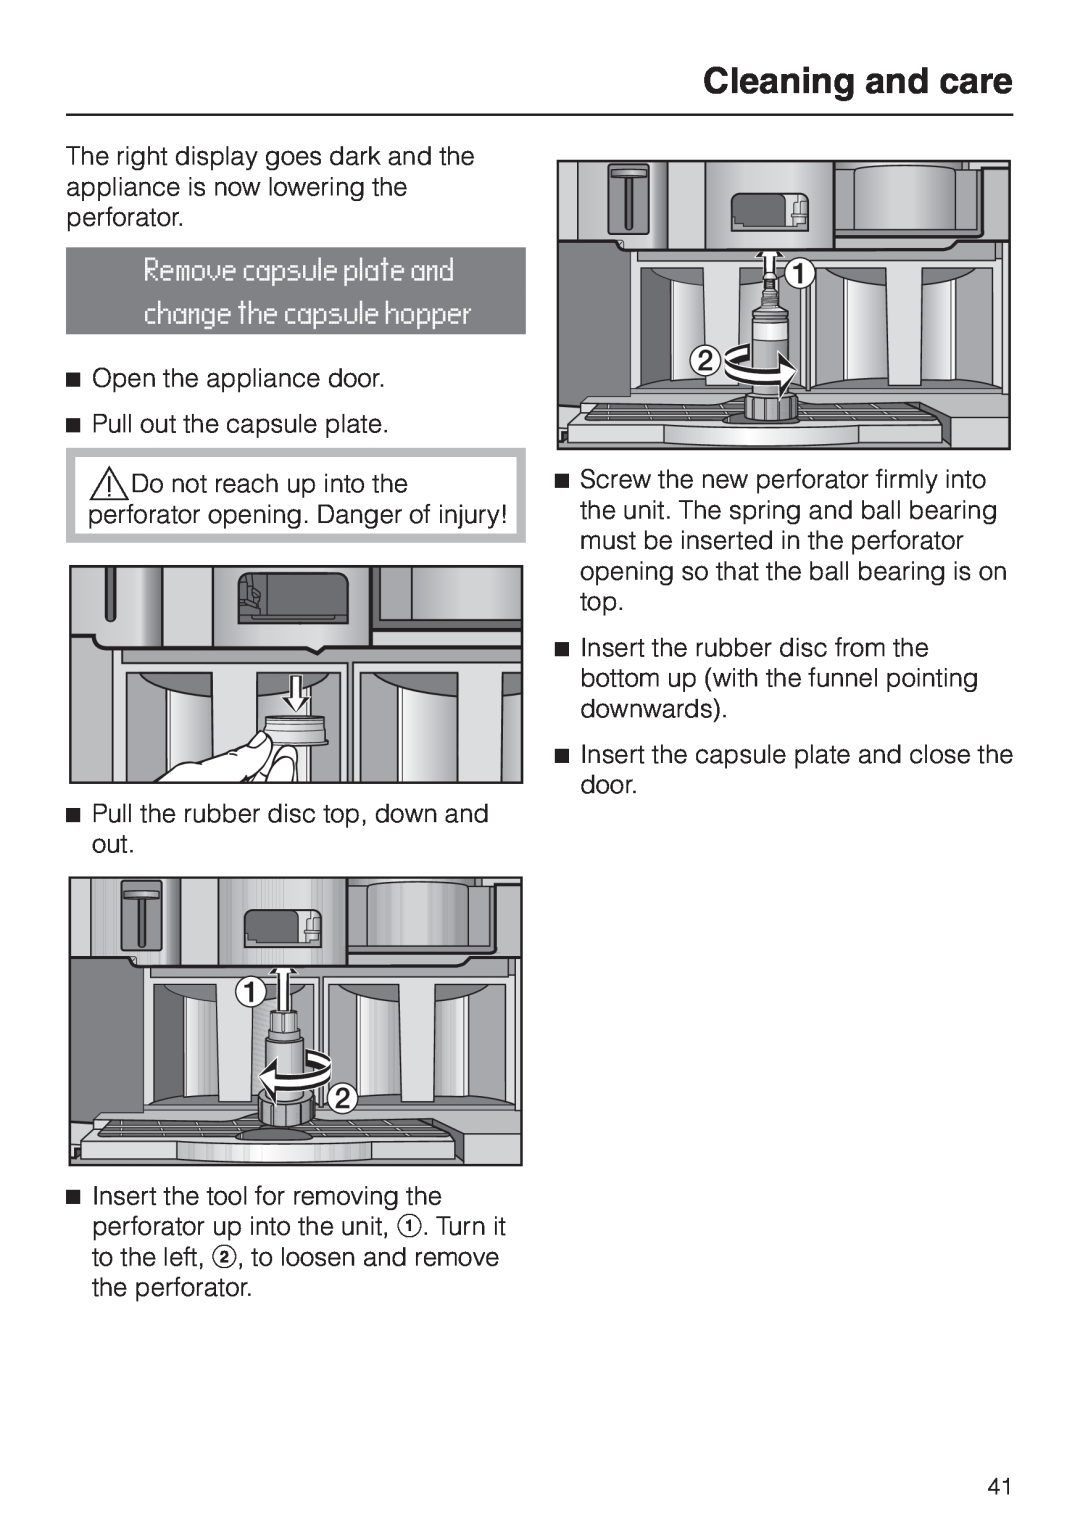 Miele CVA 2660 installation instructions Cleaning and care, Open the appliance door 